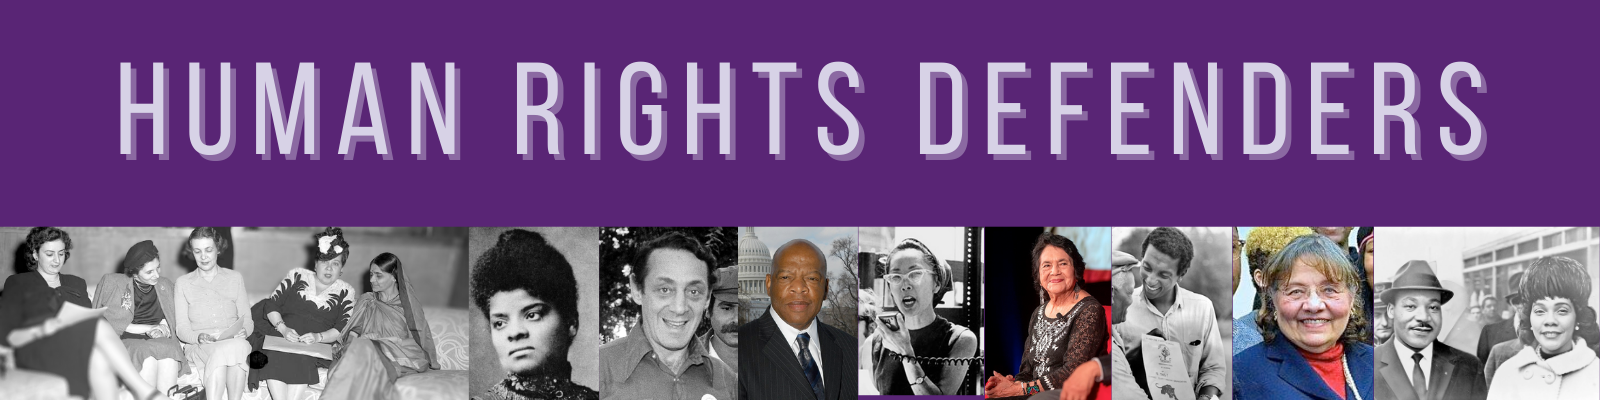 Banner image with purple background and photographs of human rights defenders